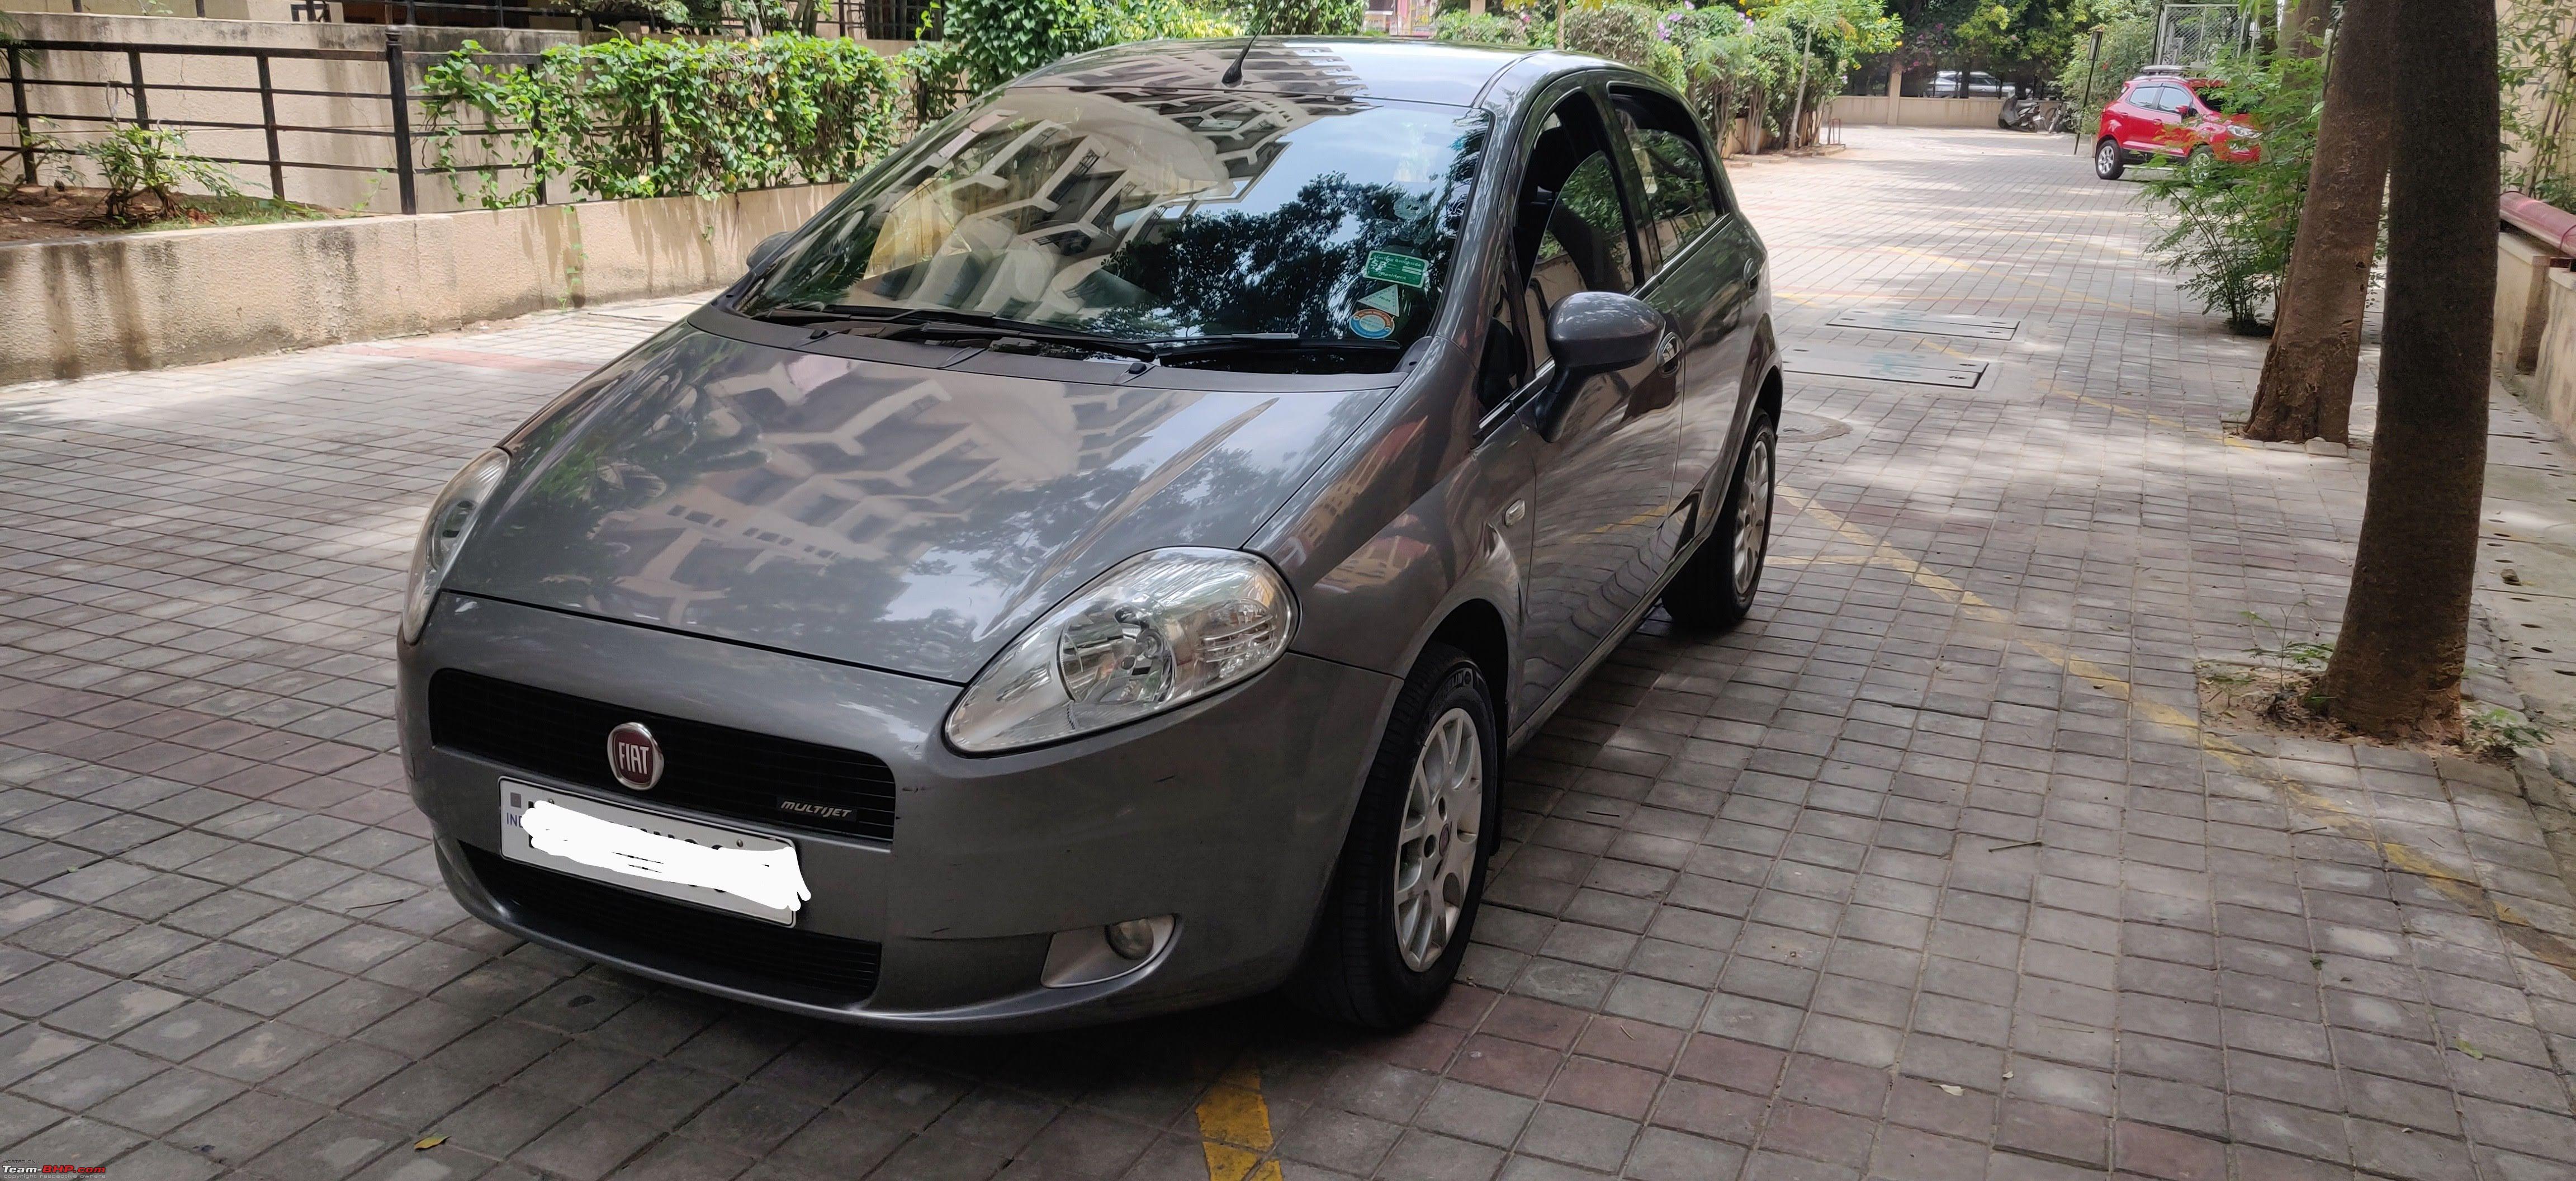 Fiat Grande Punto : Test Drive & Review - Page 460 - Team-BHP